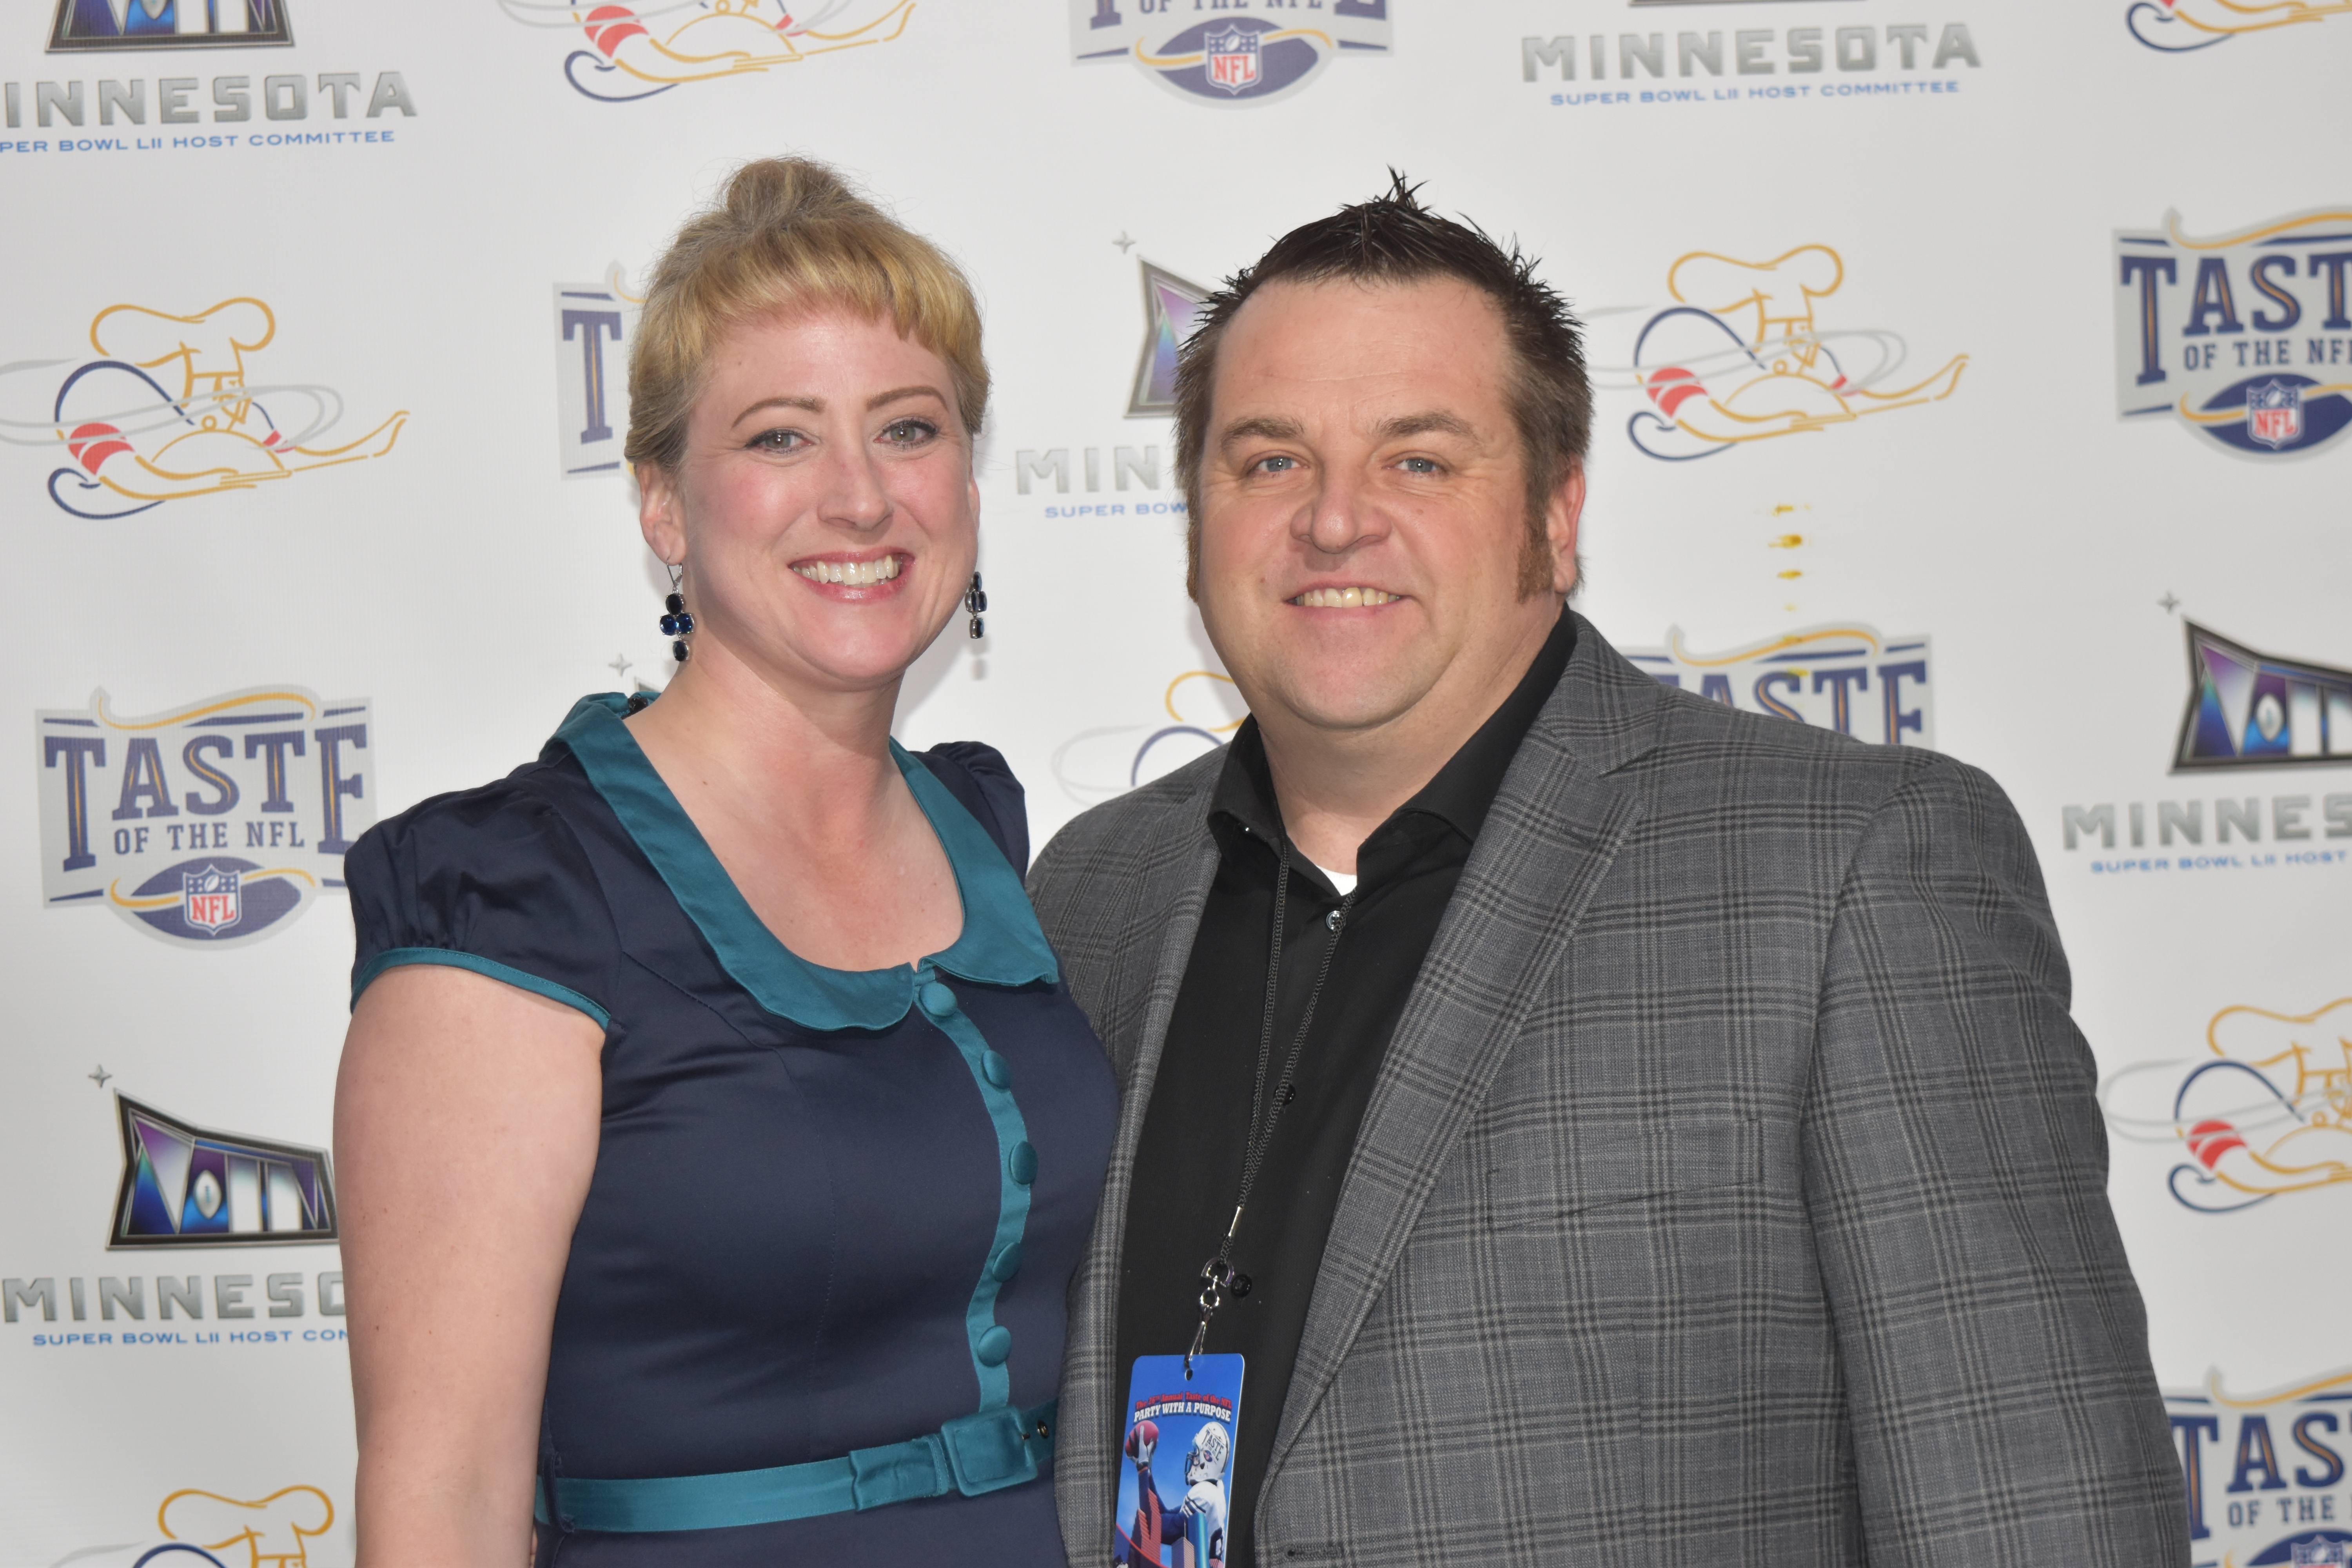 Lisa Moran represented Team Draft at the 26th Annual Taste of the NFL 